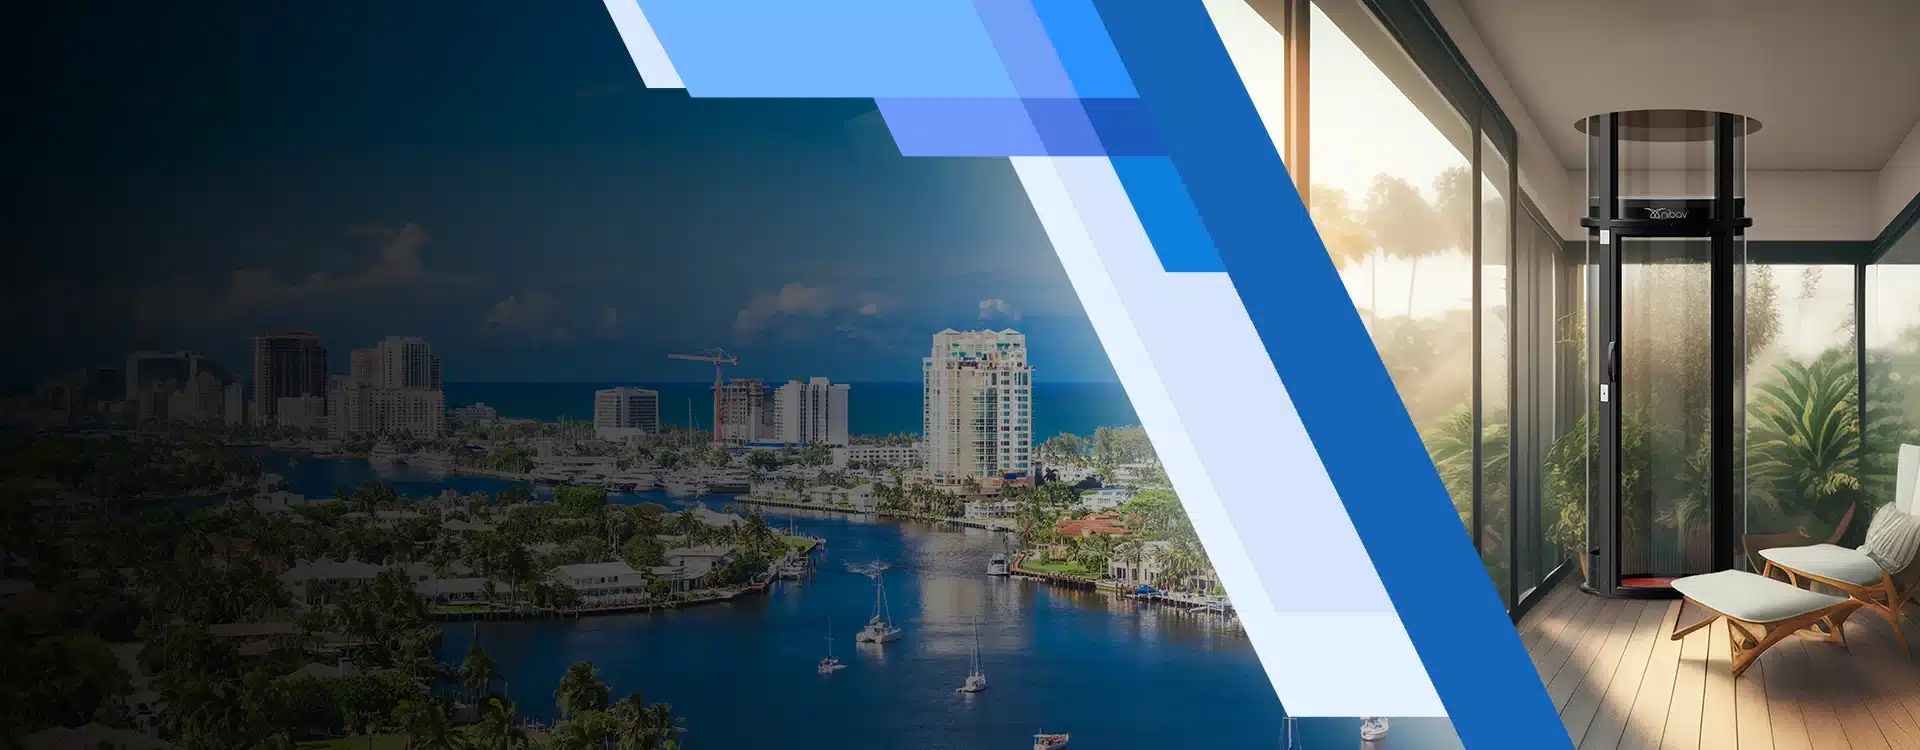 Residential Elevators in Fort Lauderdale - Nibav Lifts USA